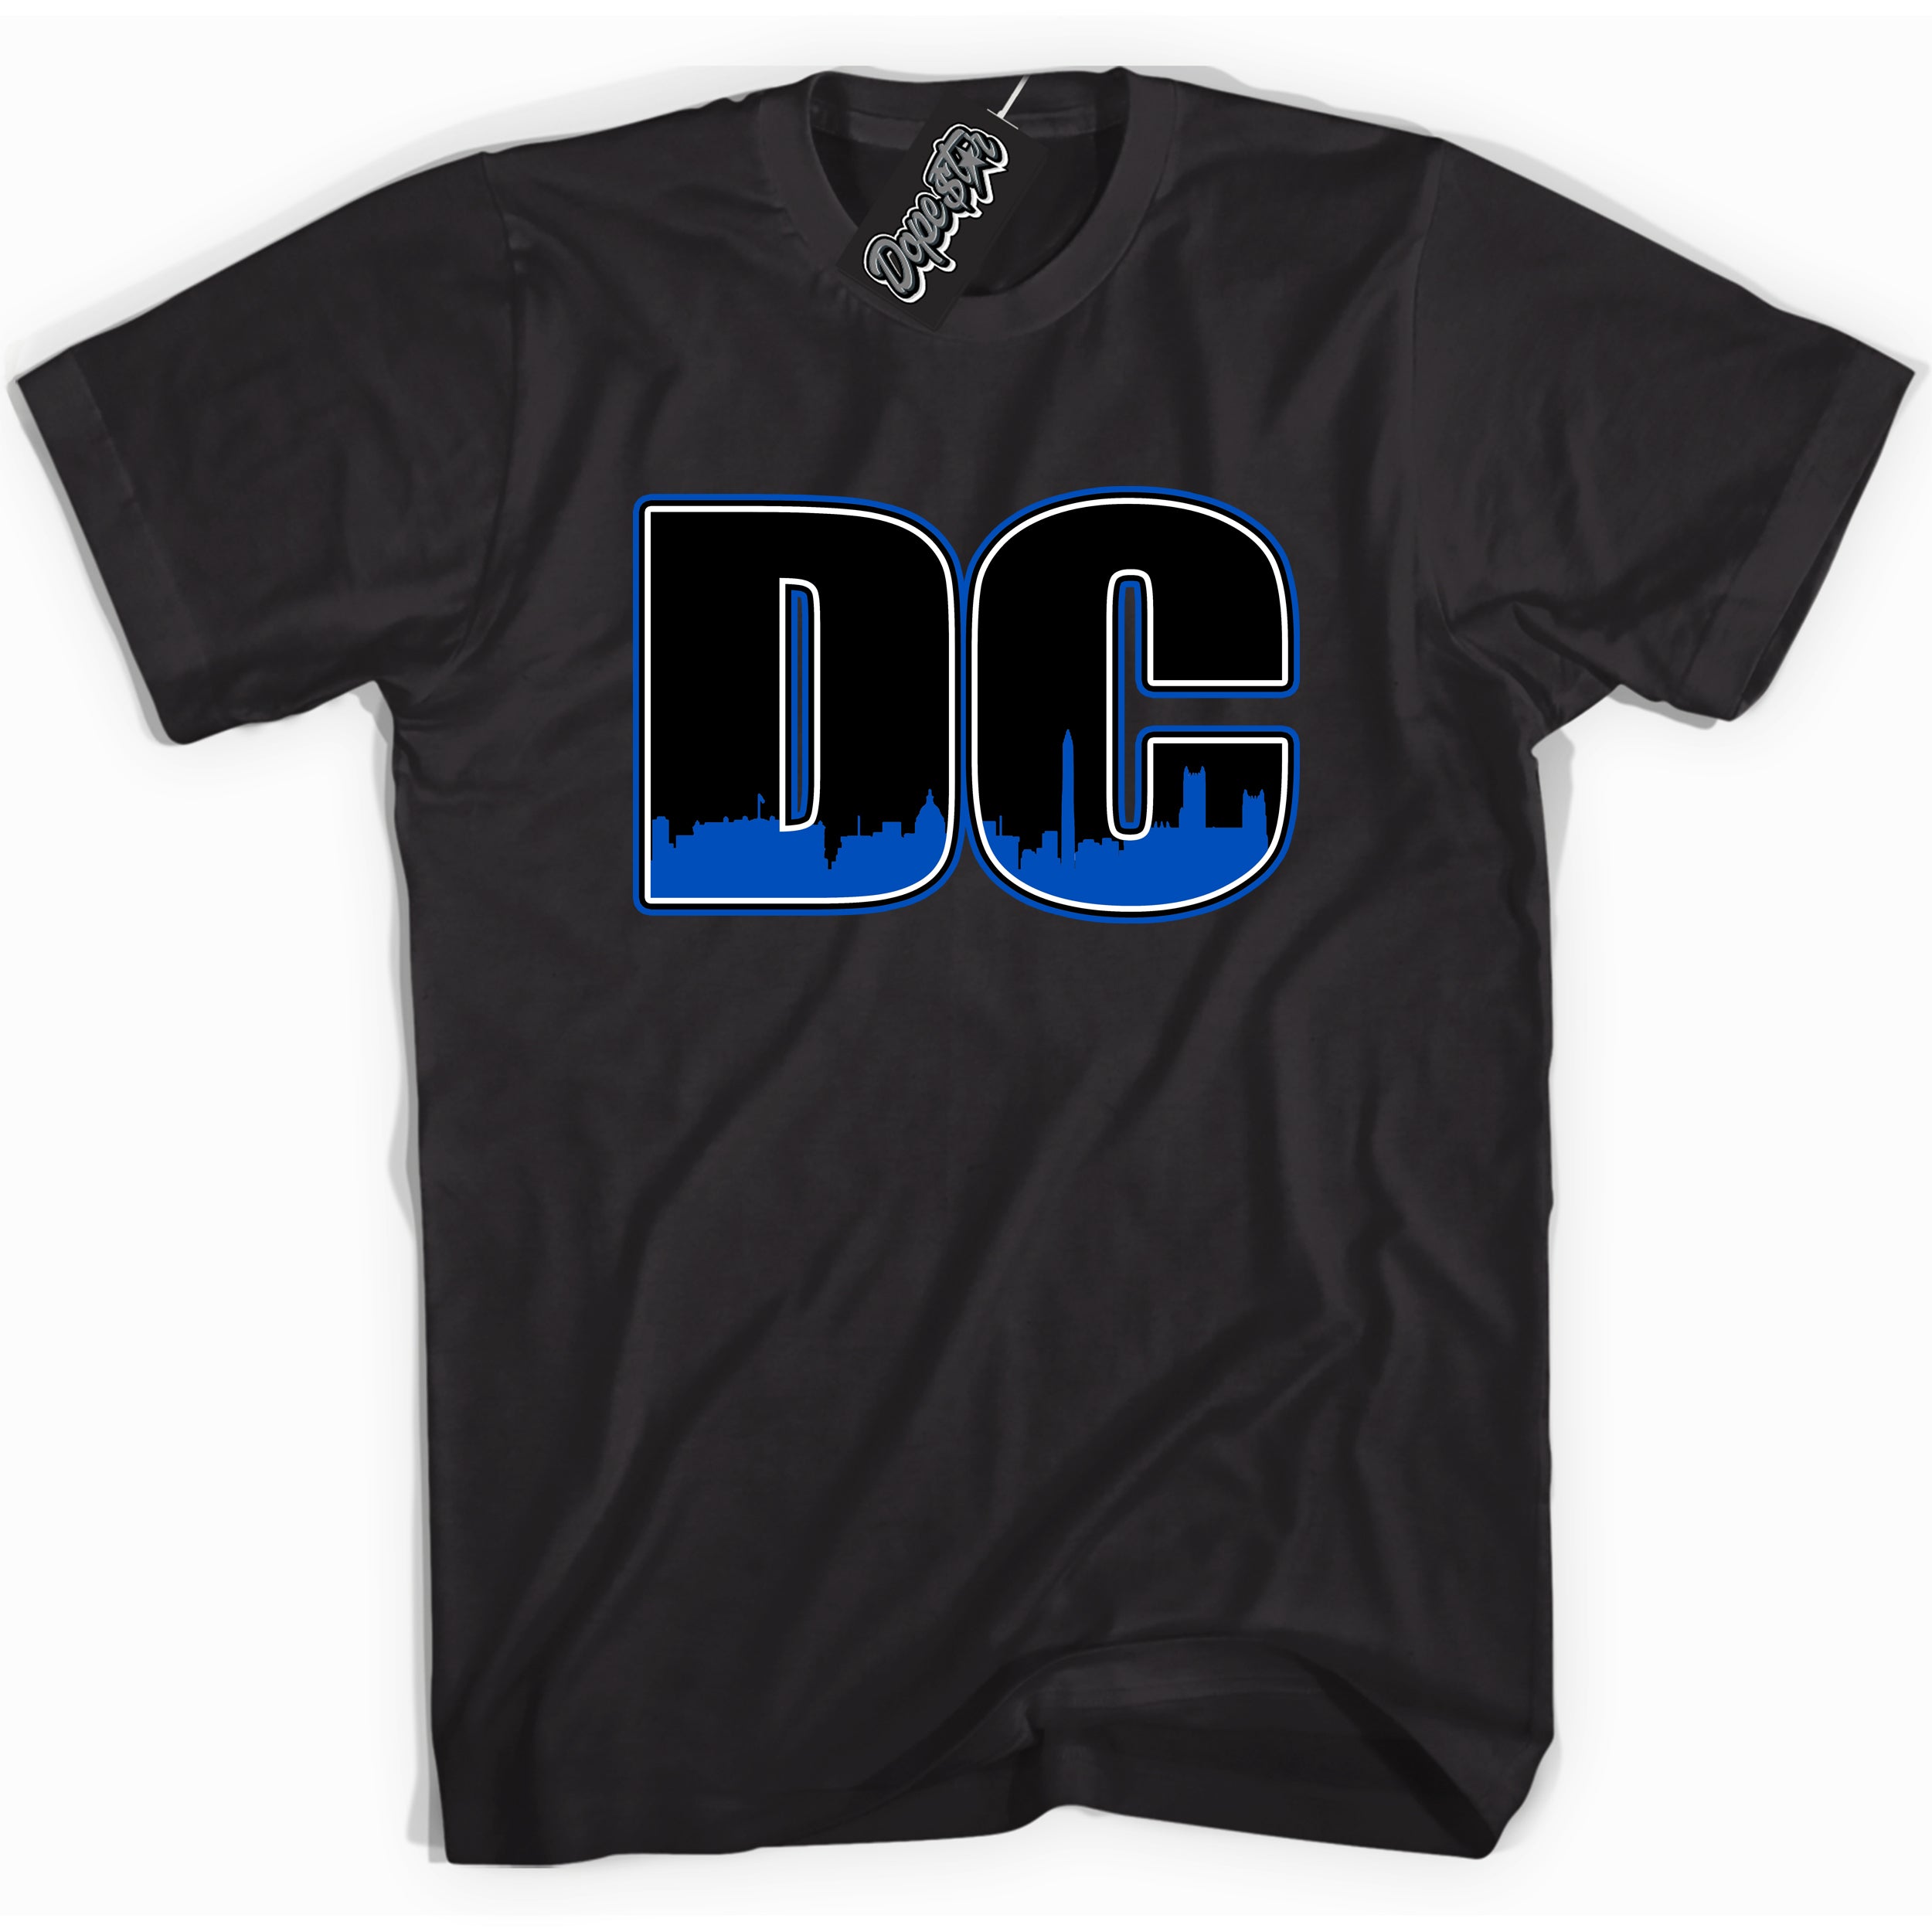 Cool Black graphic tee with DC print, that perfectly matches OG Royal Reimagined 1s sneakers 